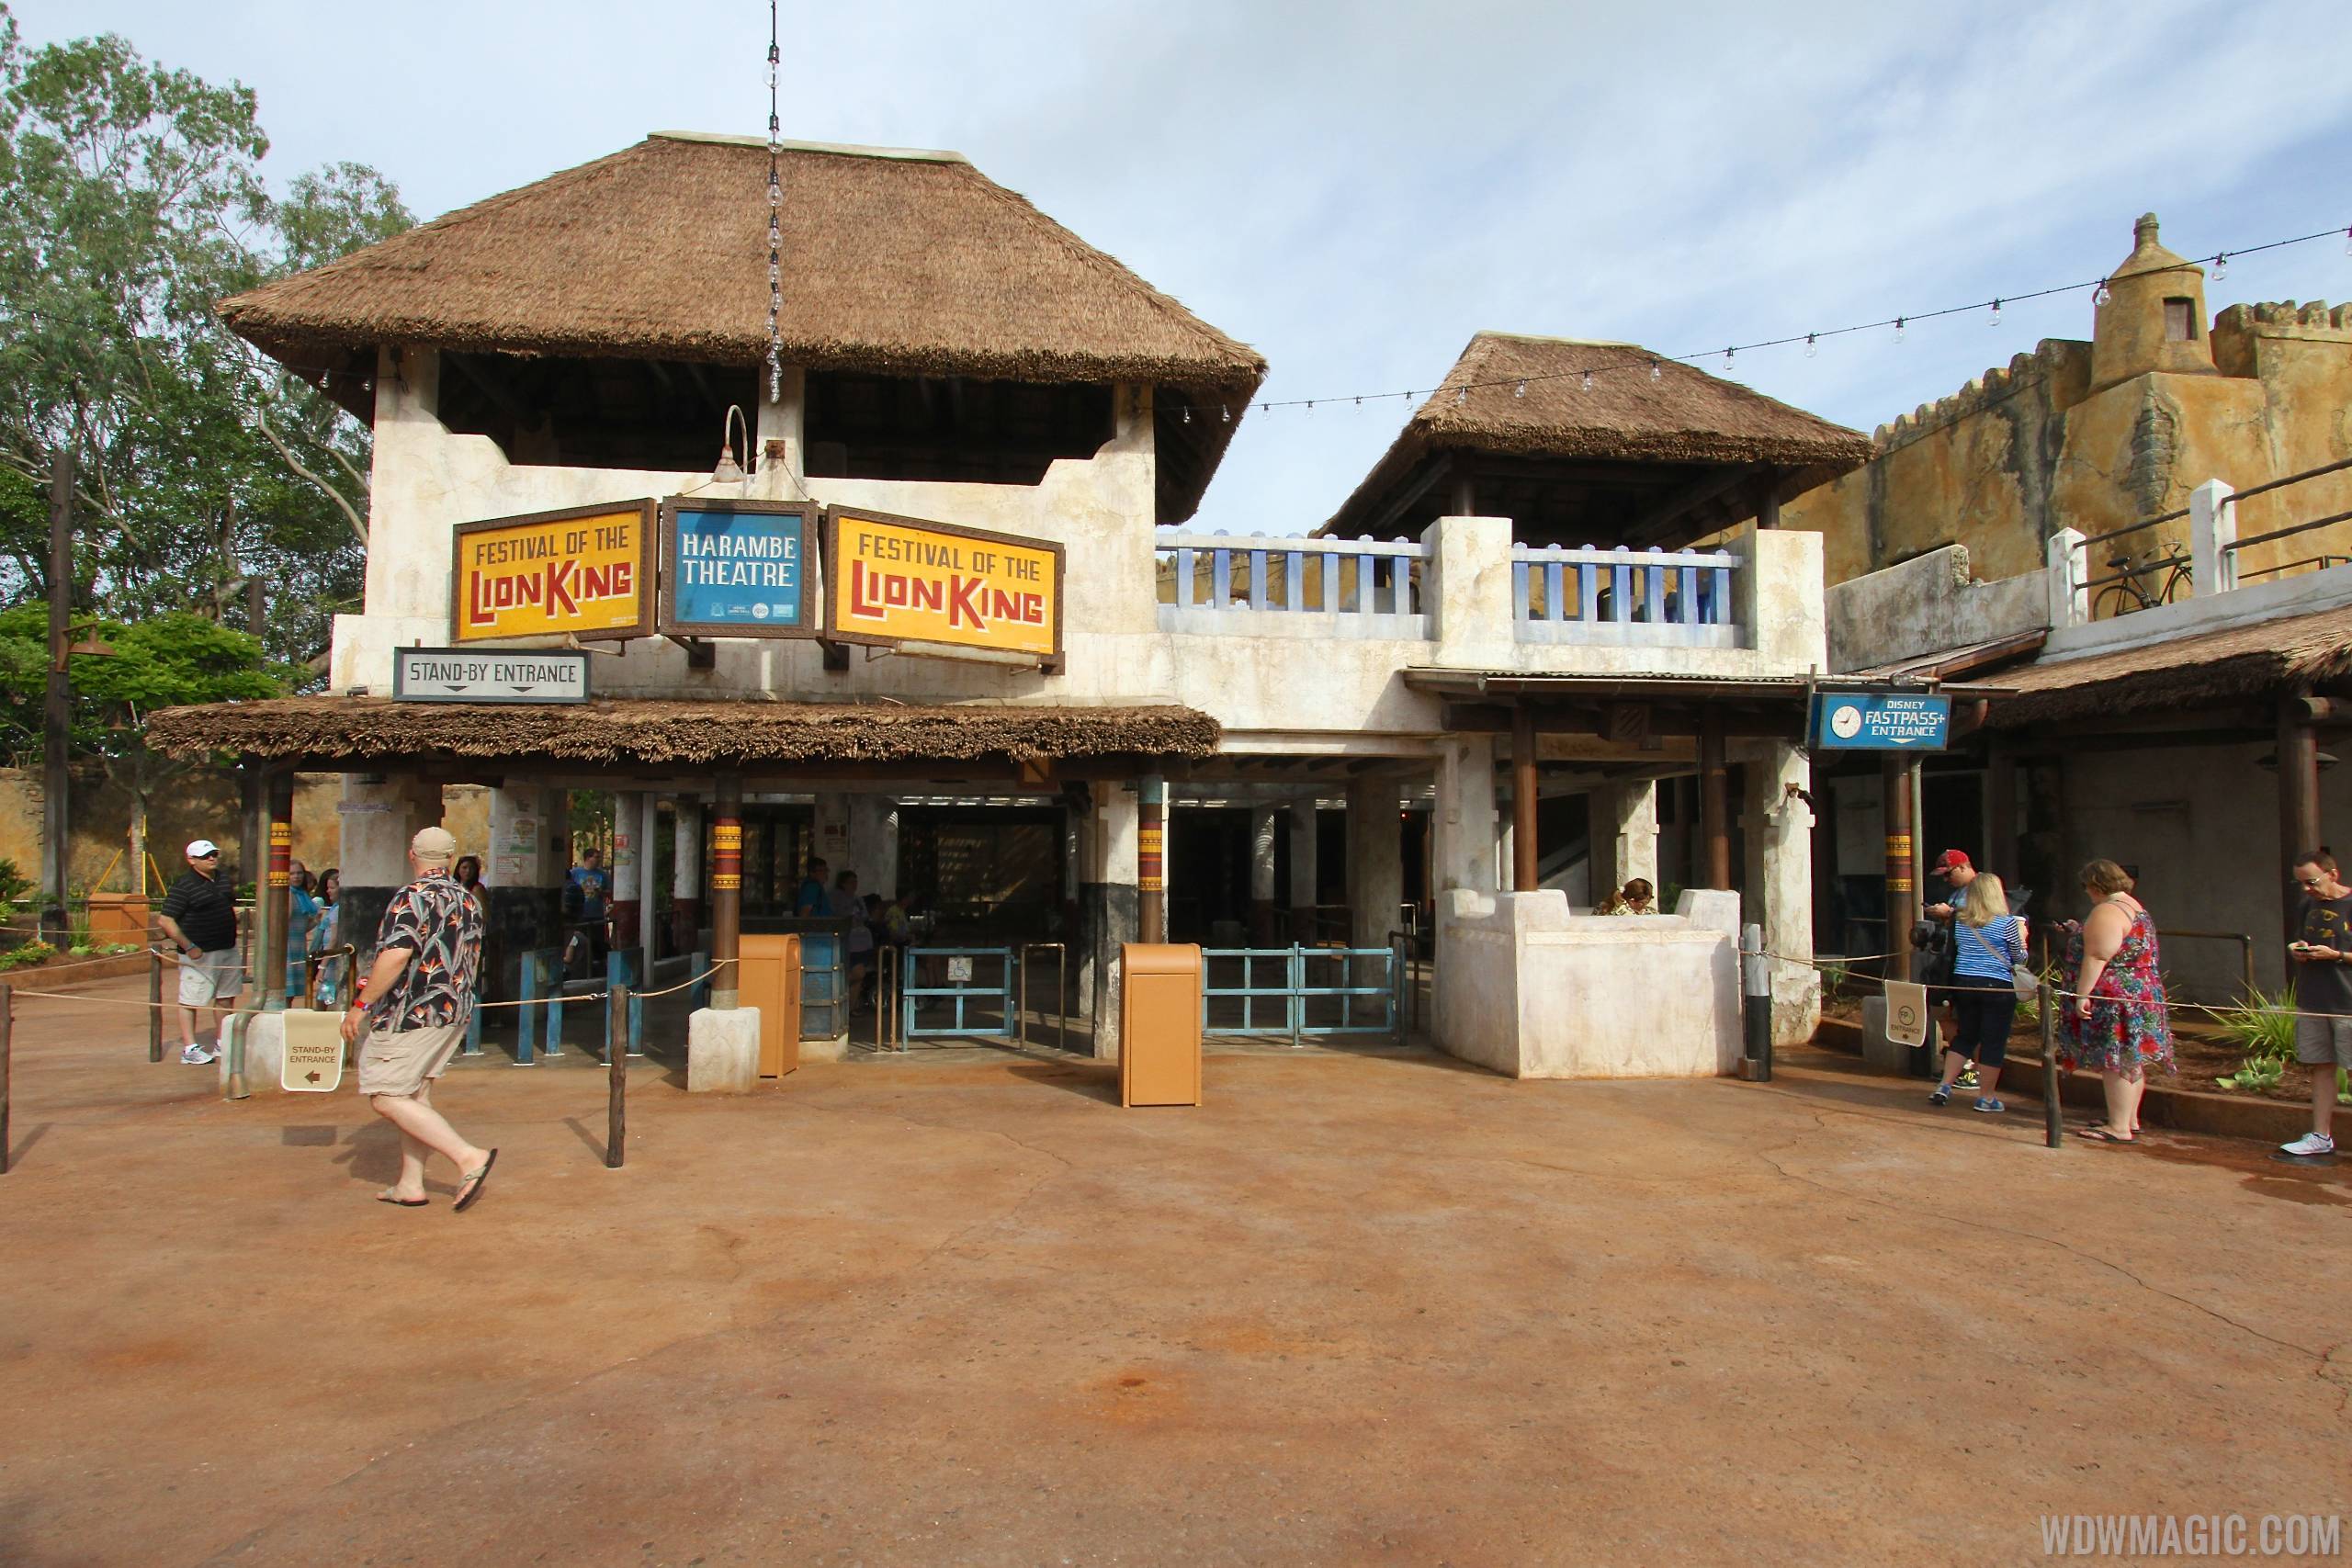 New Harambe Theatre area in Africa - The entrance, standby and FastPass+